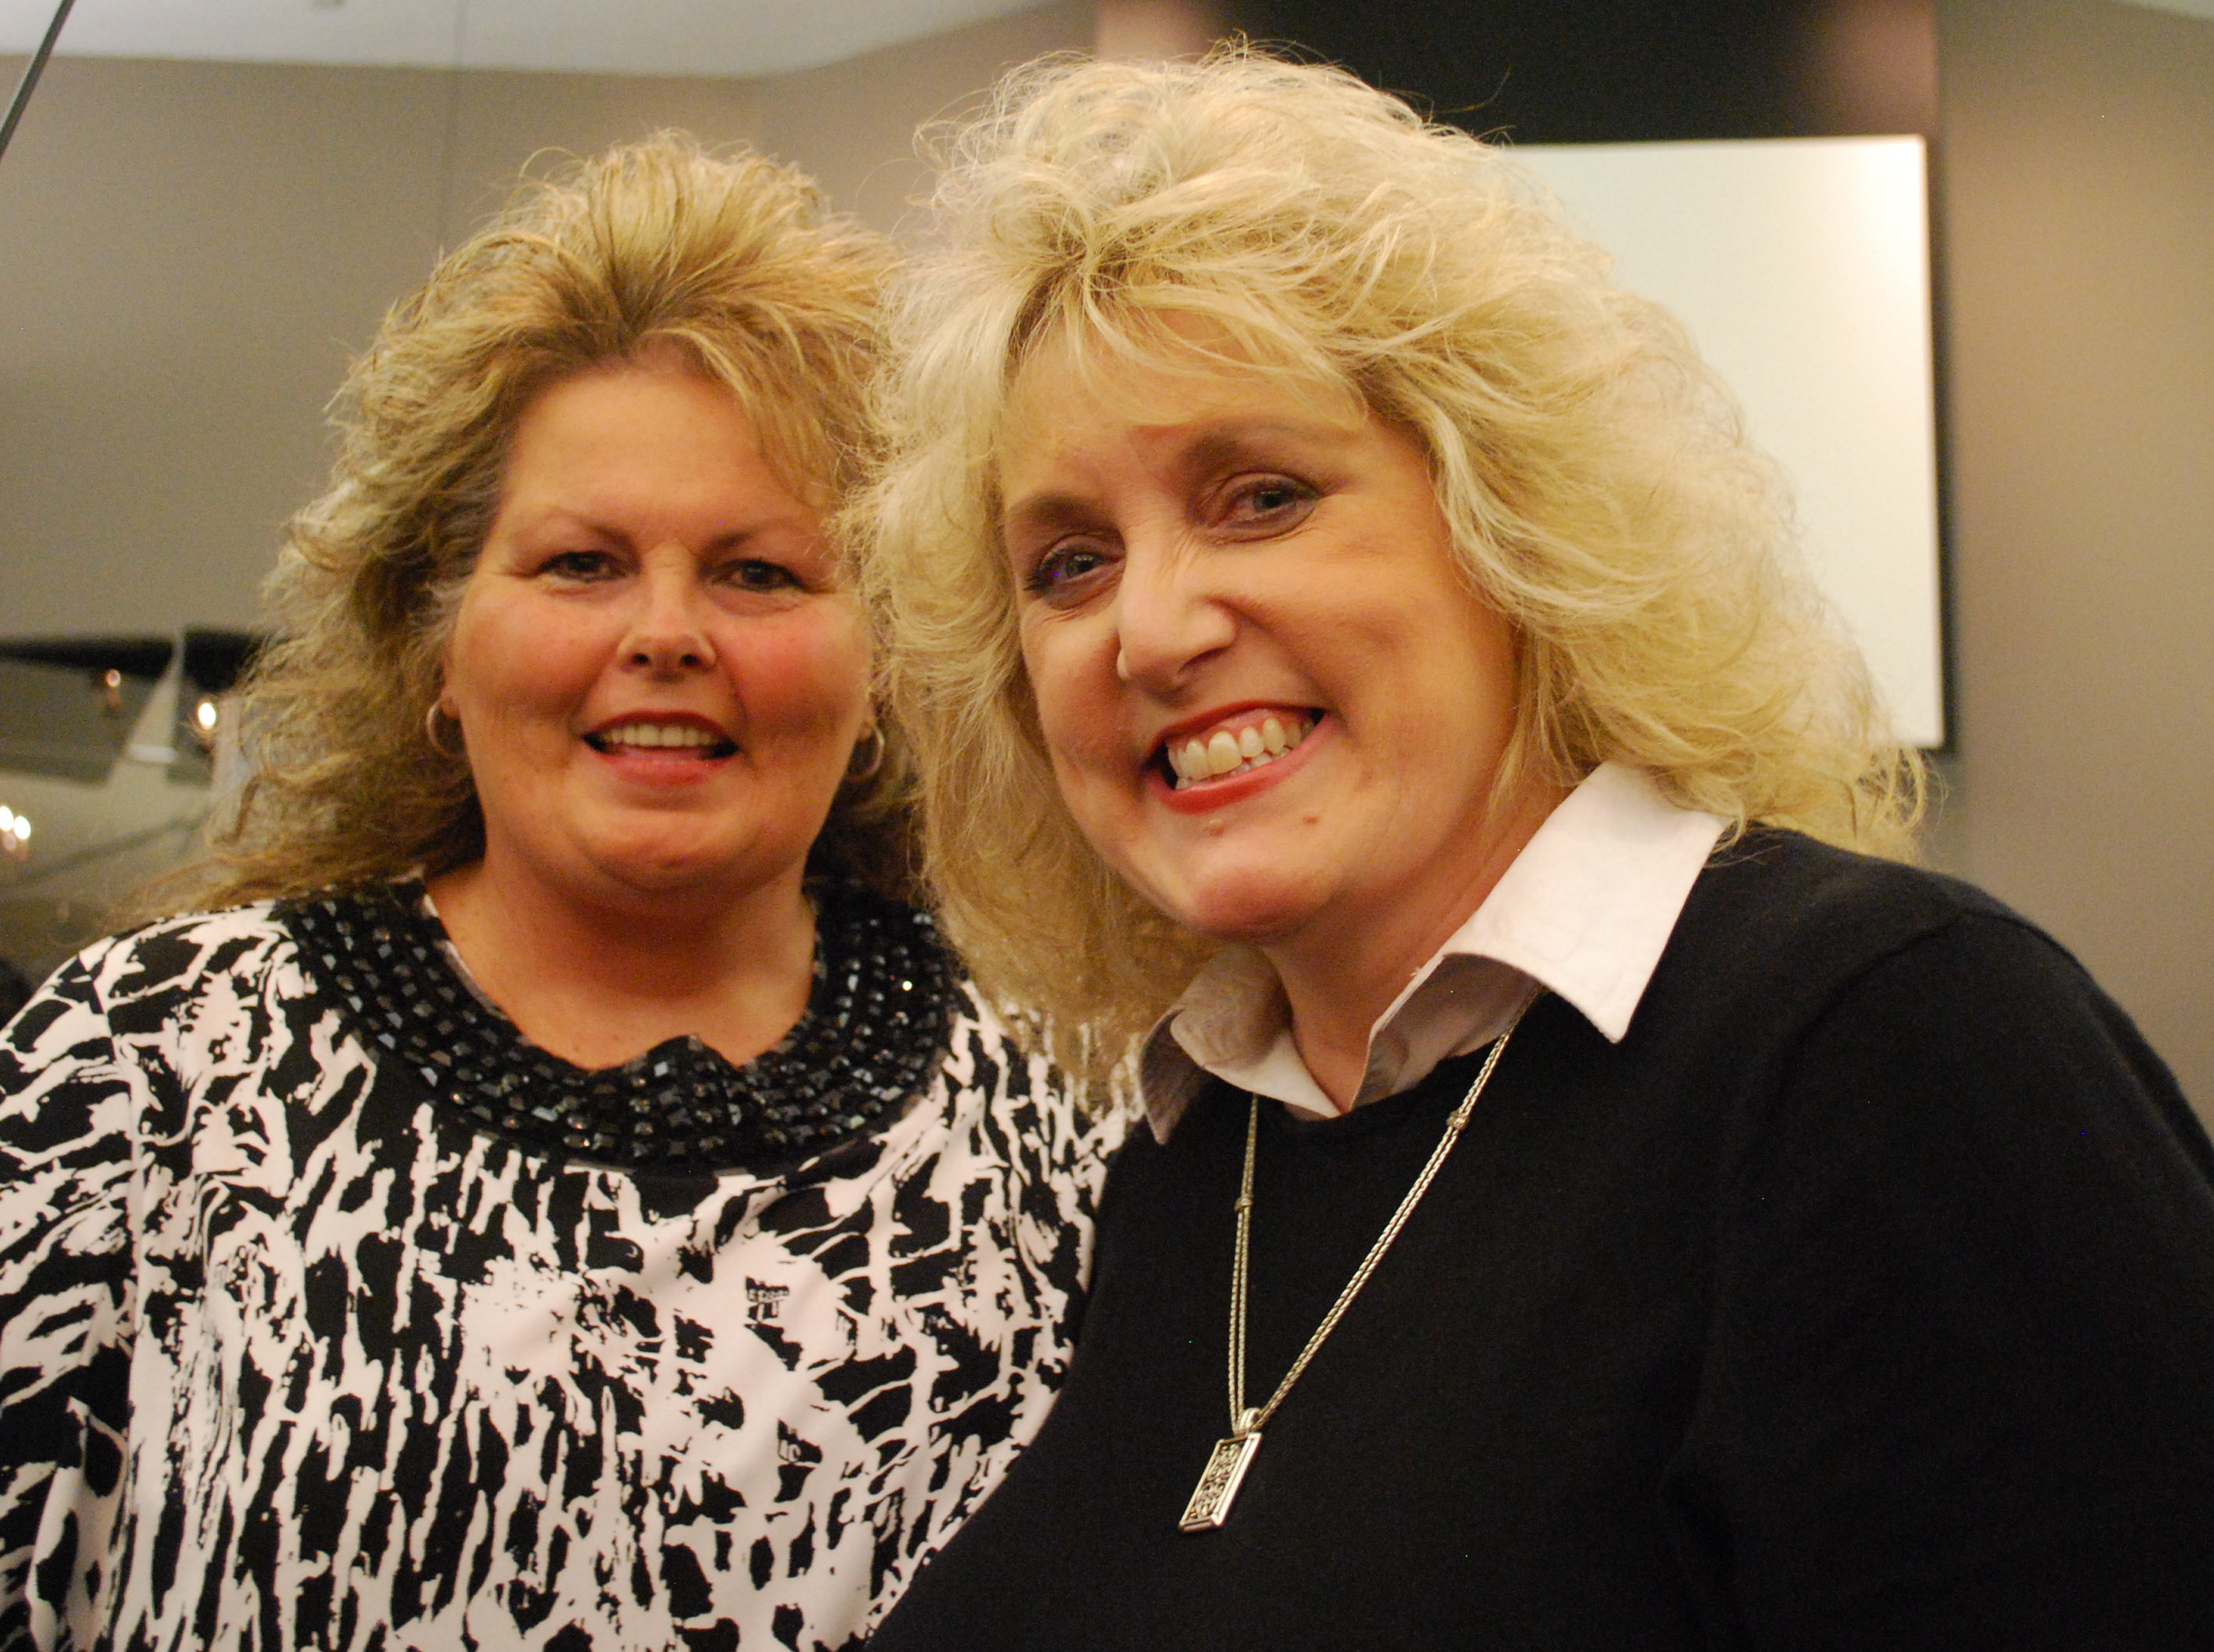 Image - Mary McDonald with Linda Pierson in 2015